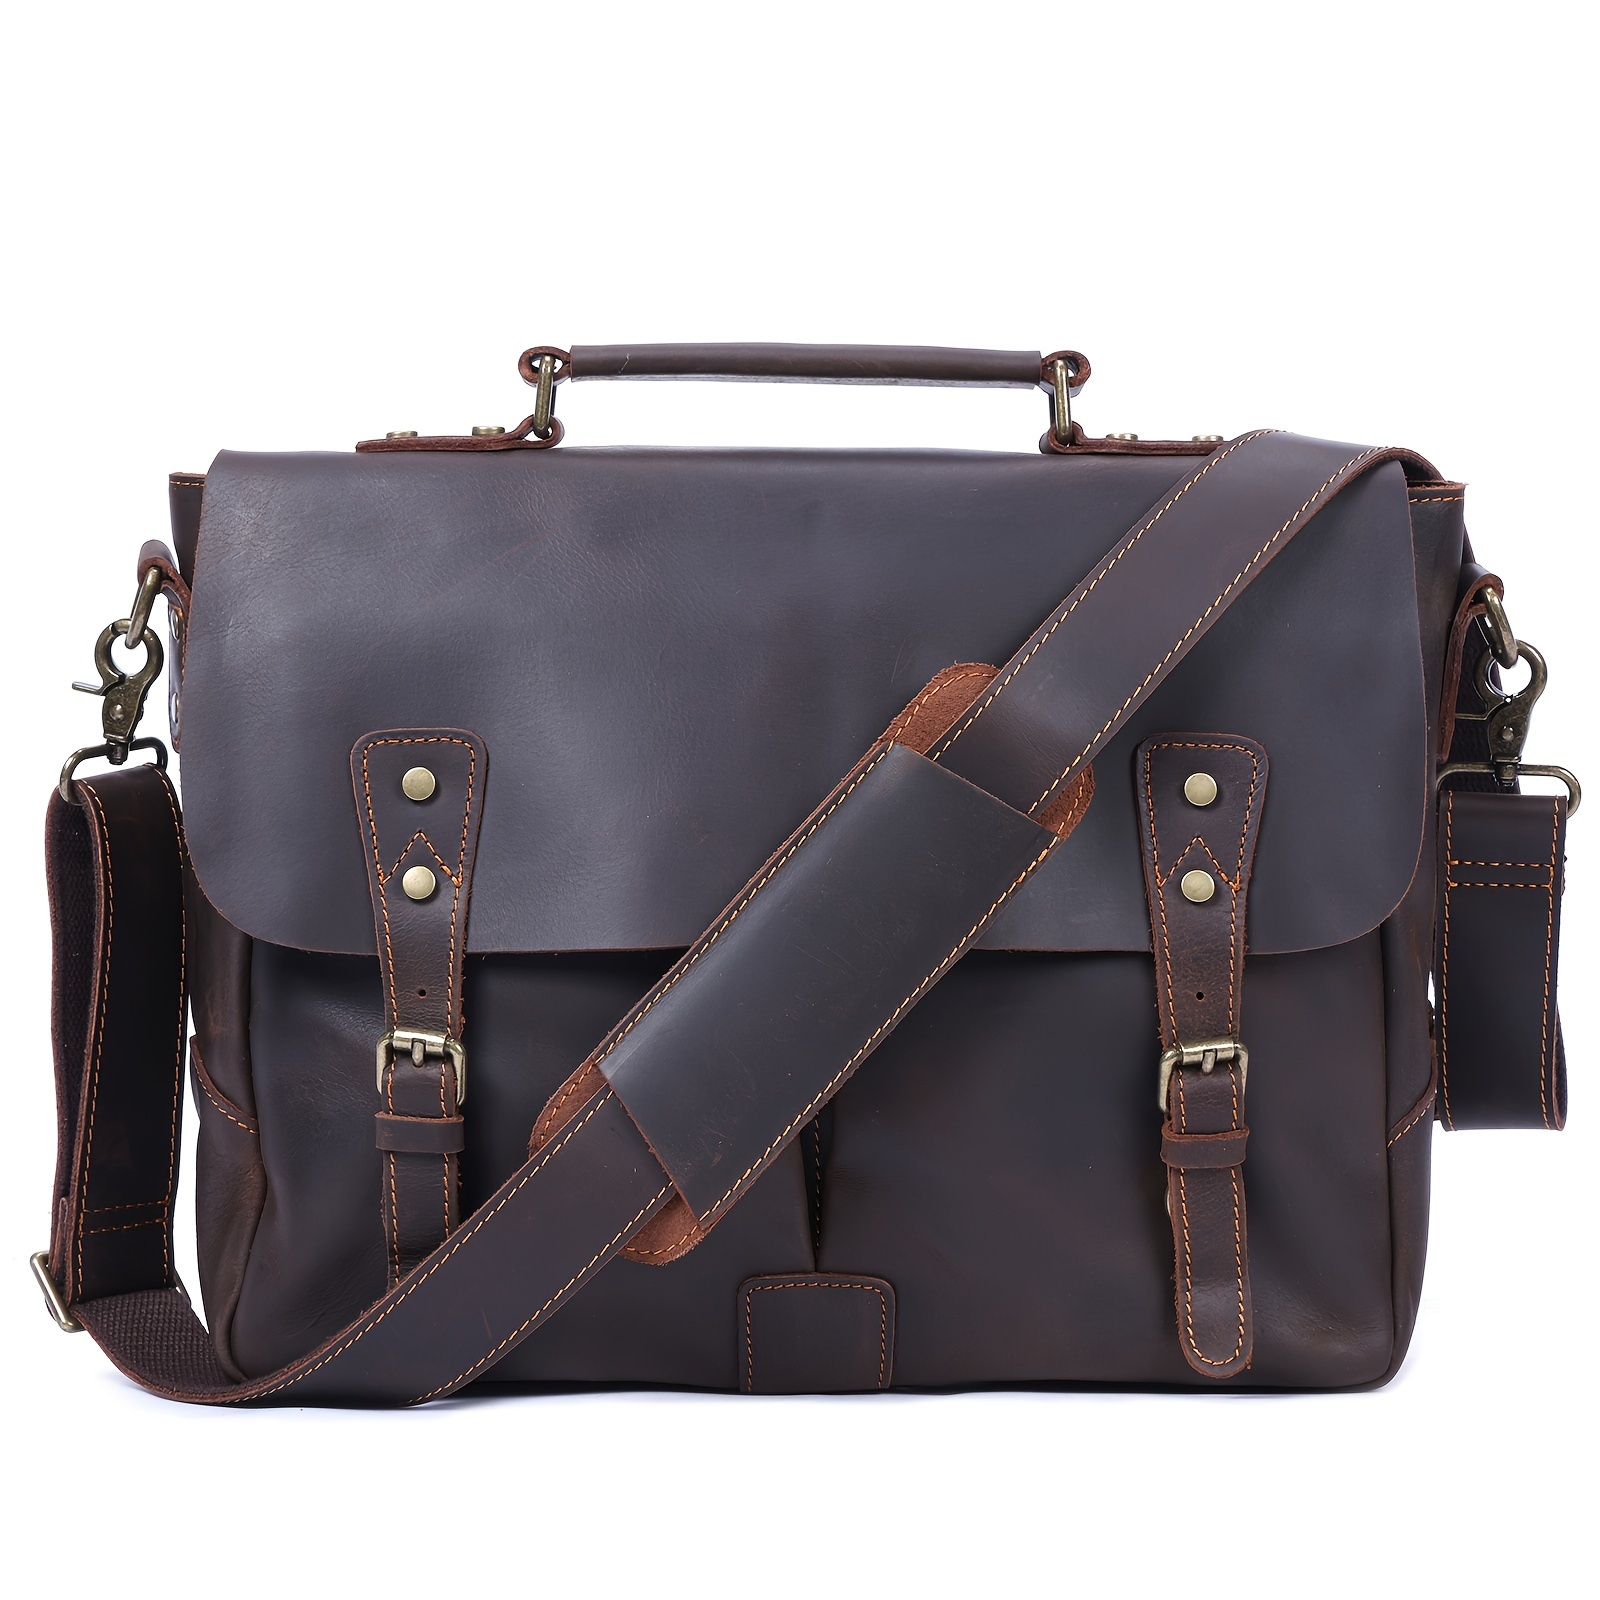 Men's Vintage Genuine Leather Briefcase Crossbody Bag, Bags For Work & Business - Click Image to Close